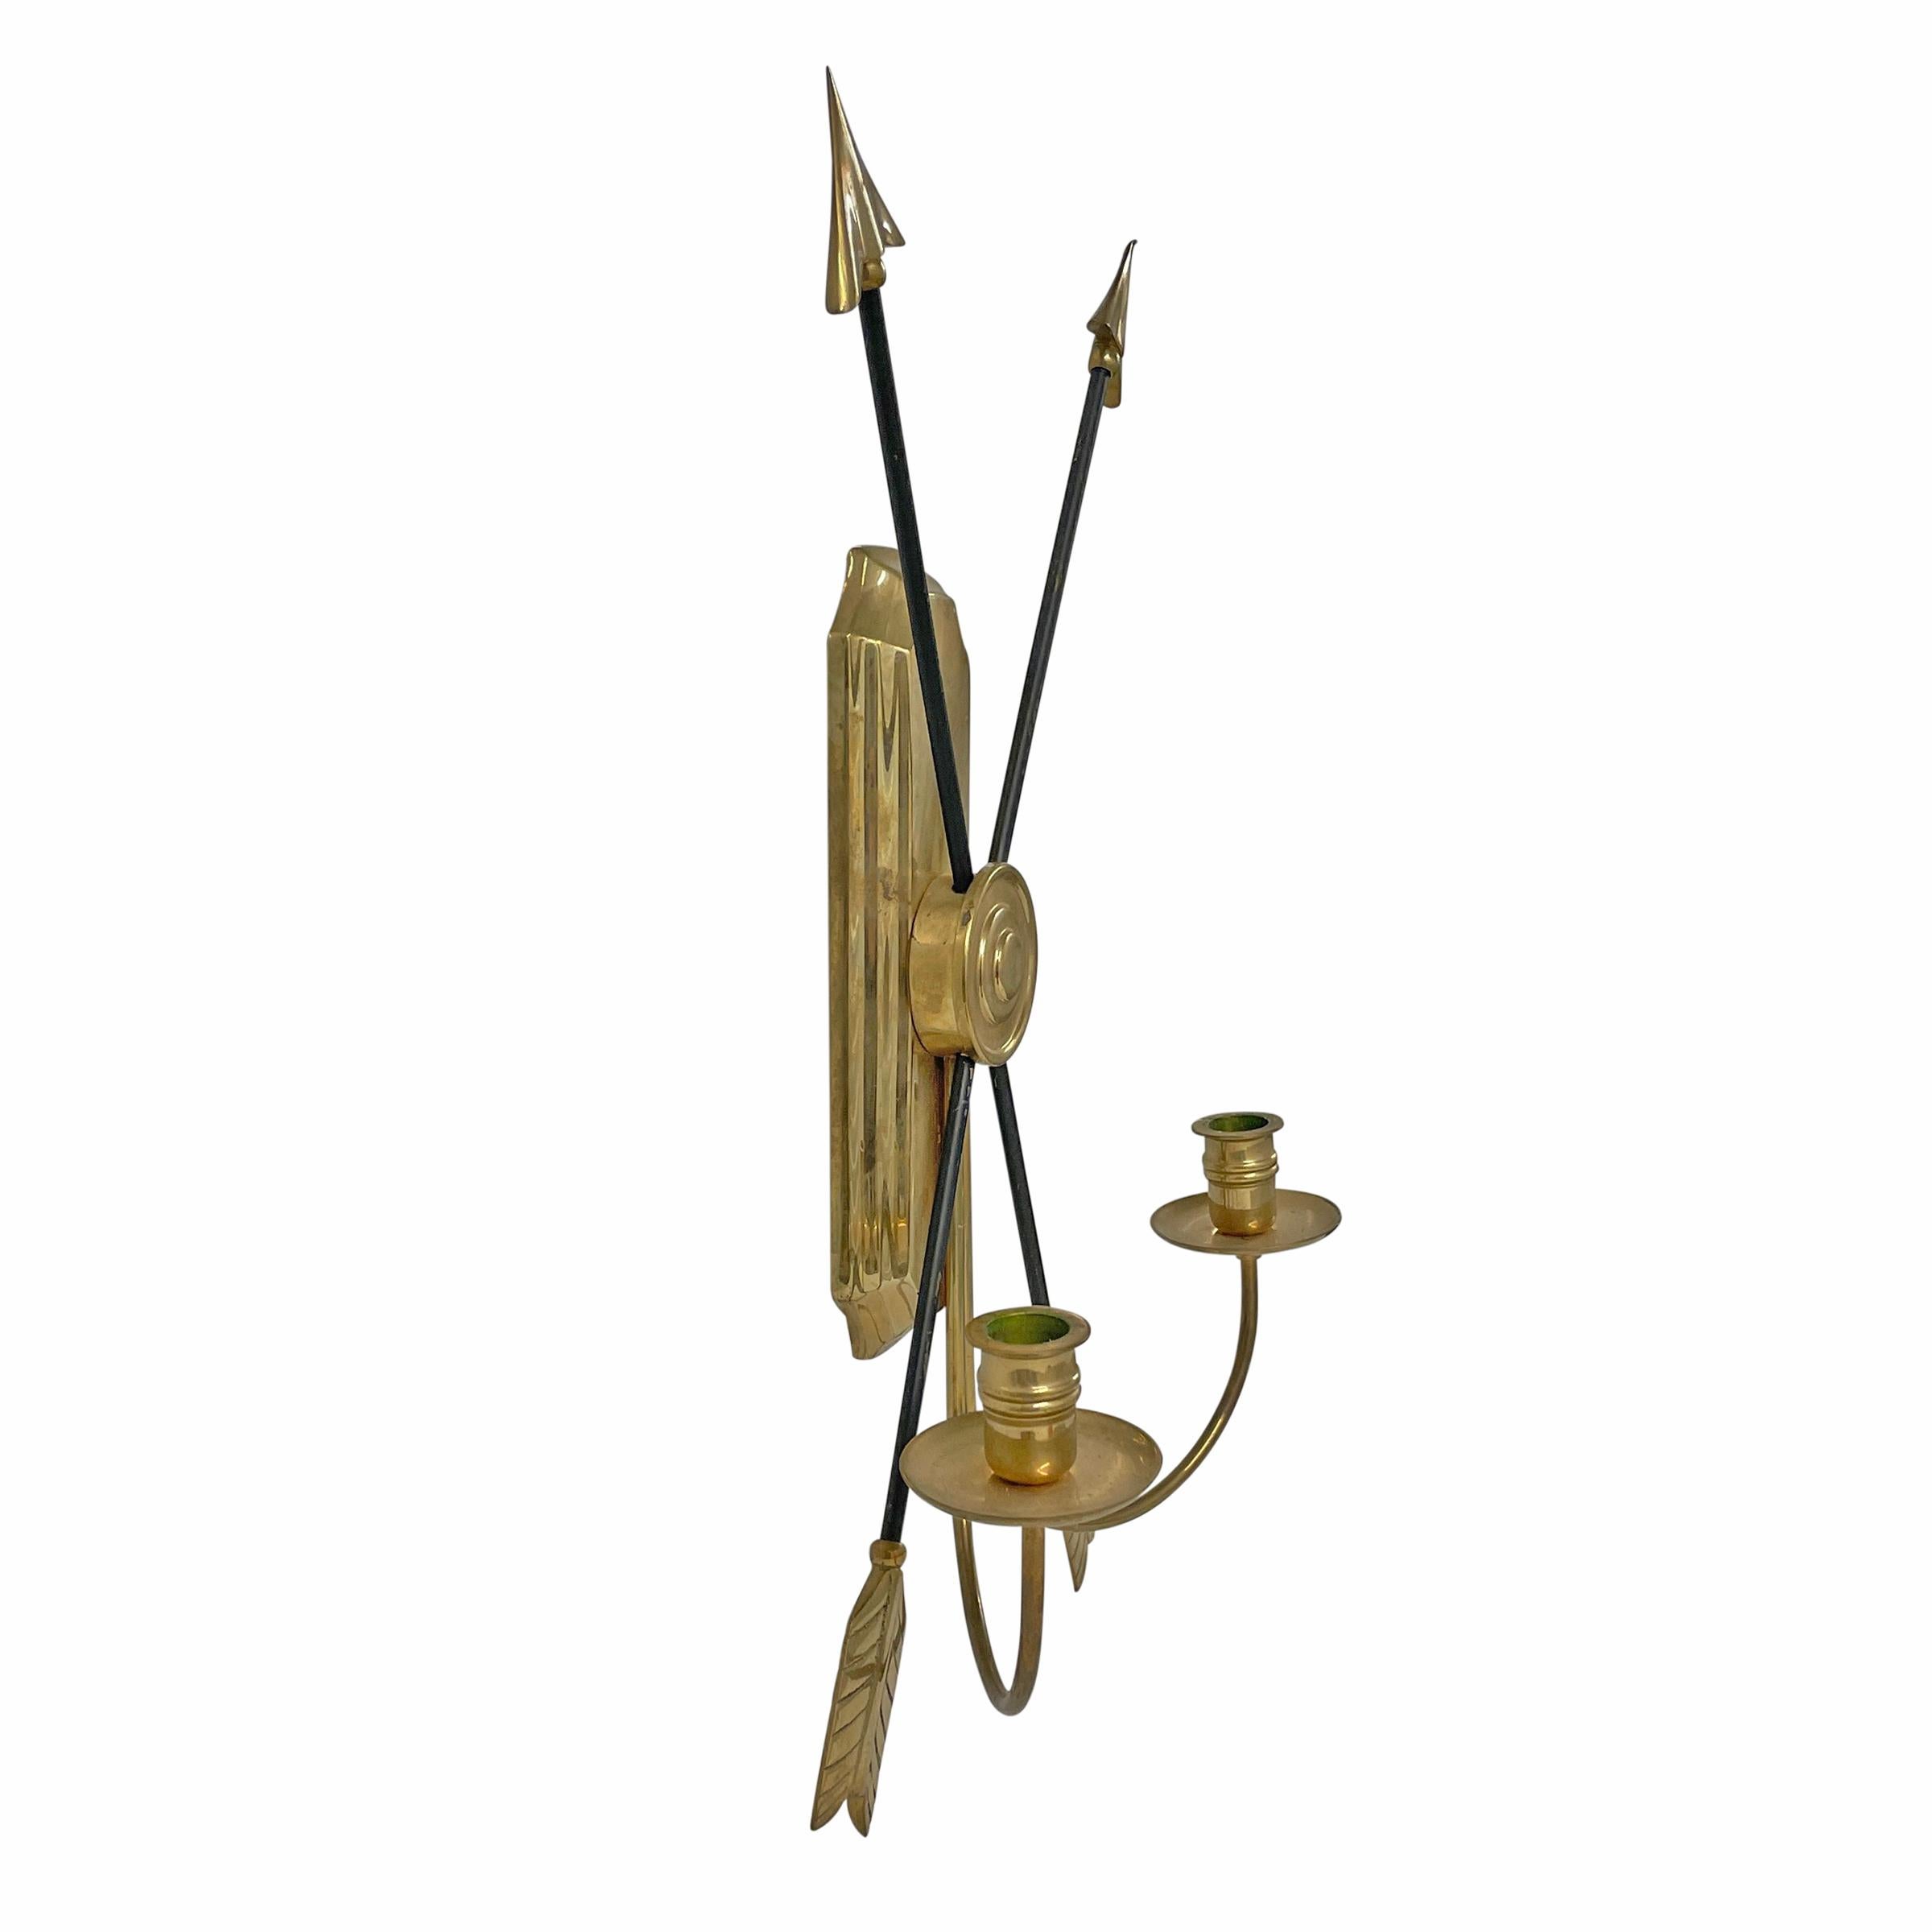 Brass Pair of Mid-20th Century Empire-Style Candle Sconces